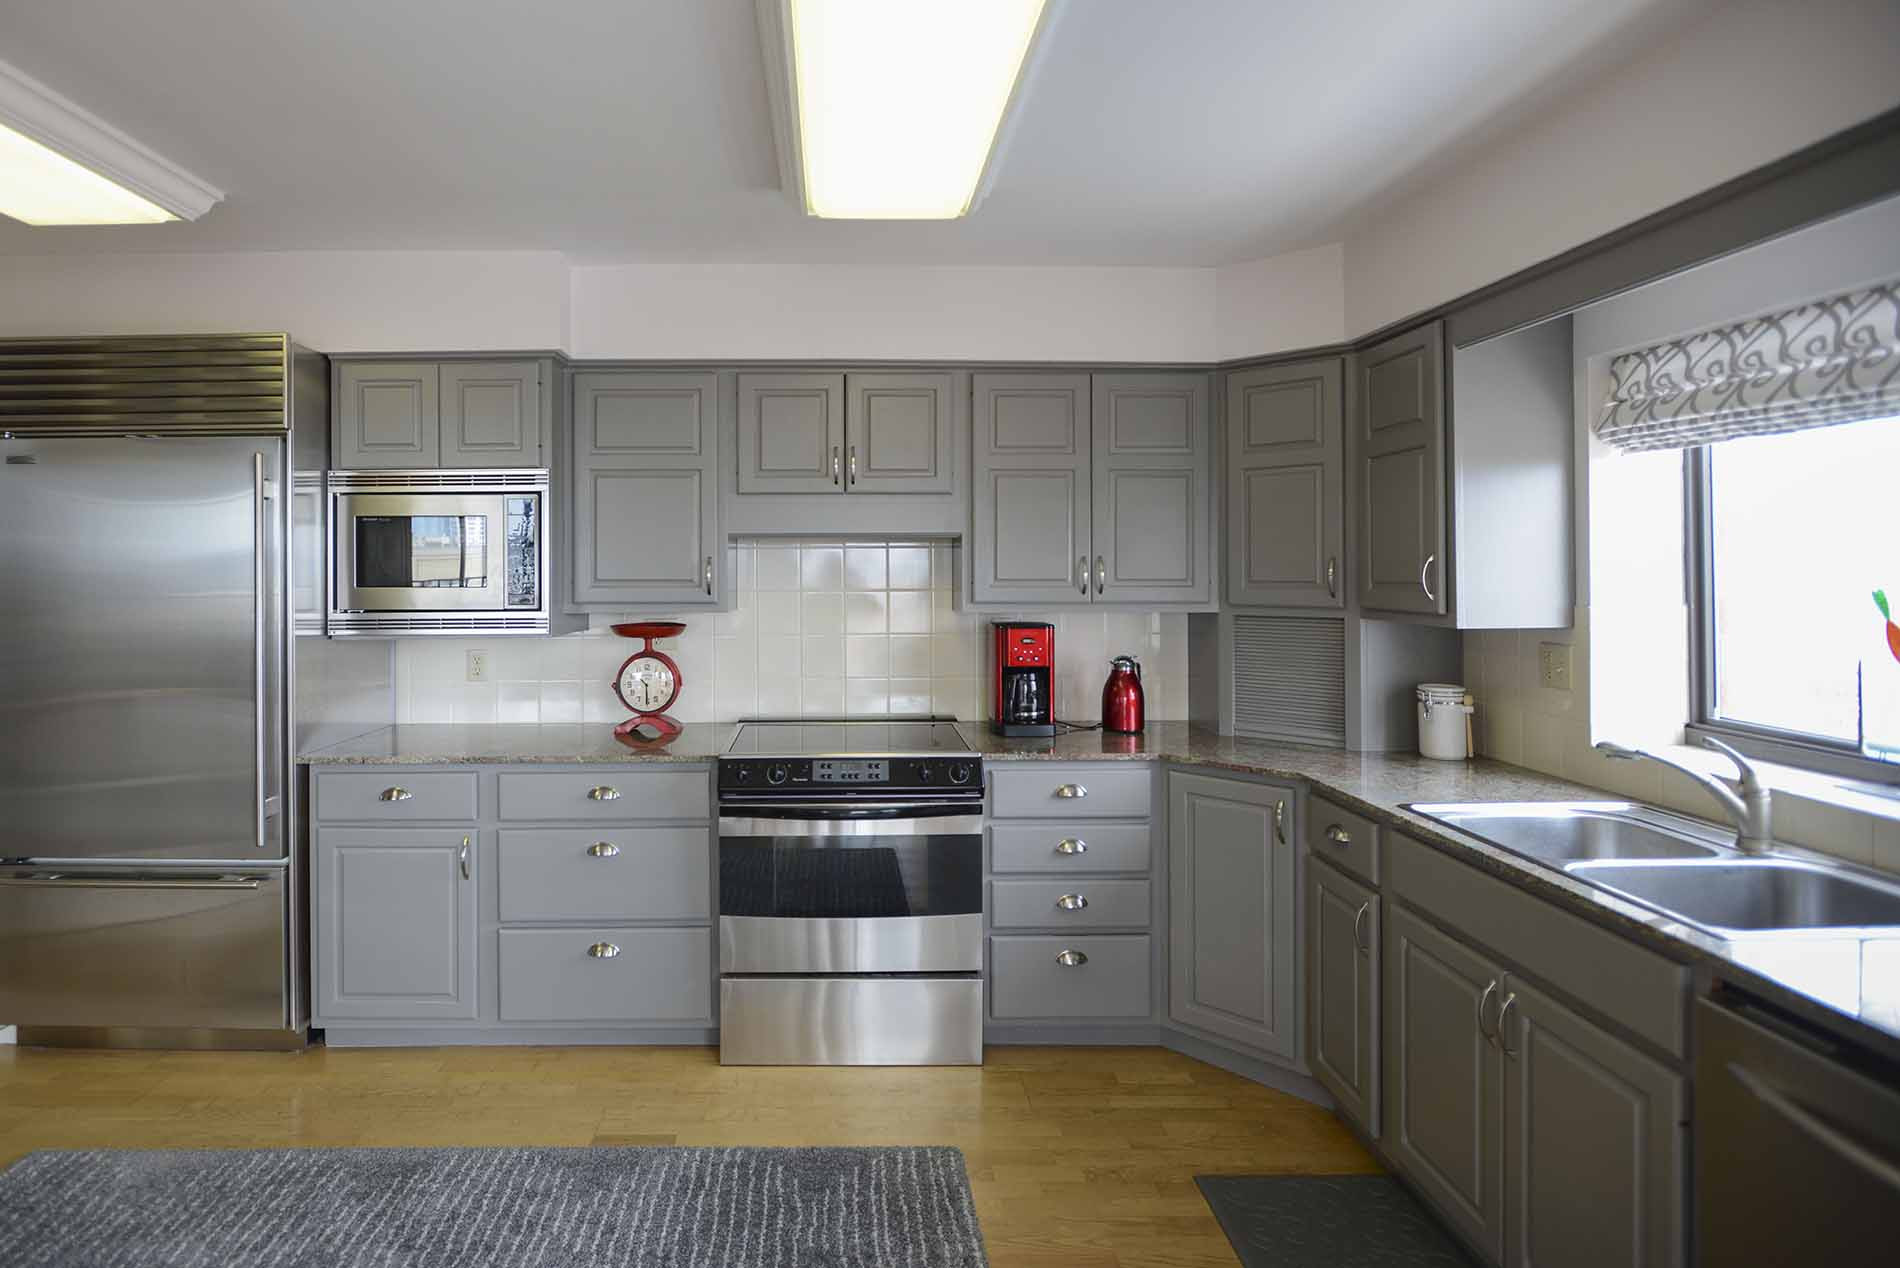 Repainting Kitchen Cabinets White
 Painting Kitchen Cabinets White Denver Paint Contractor